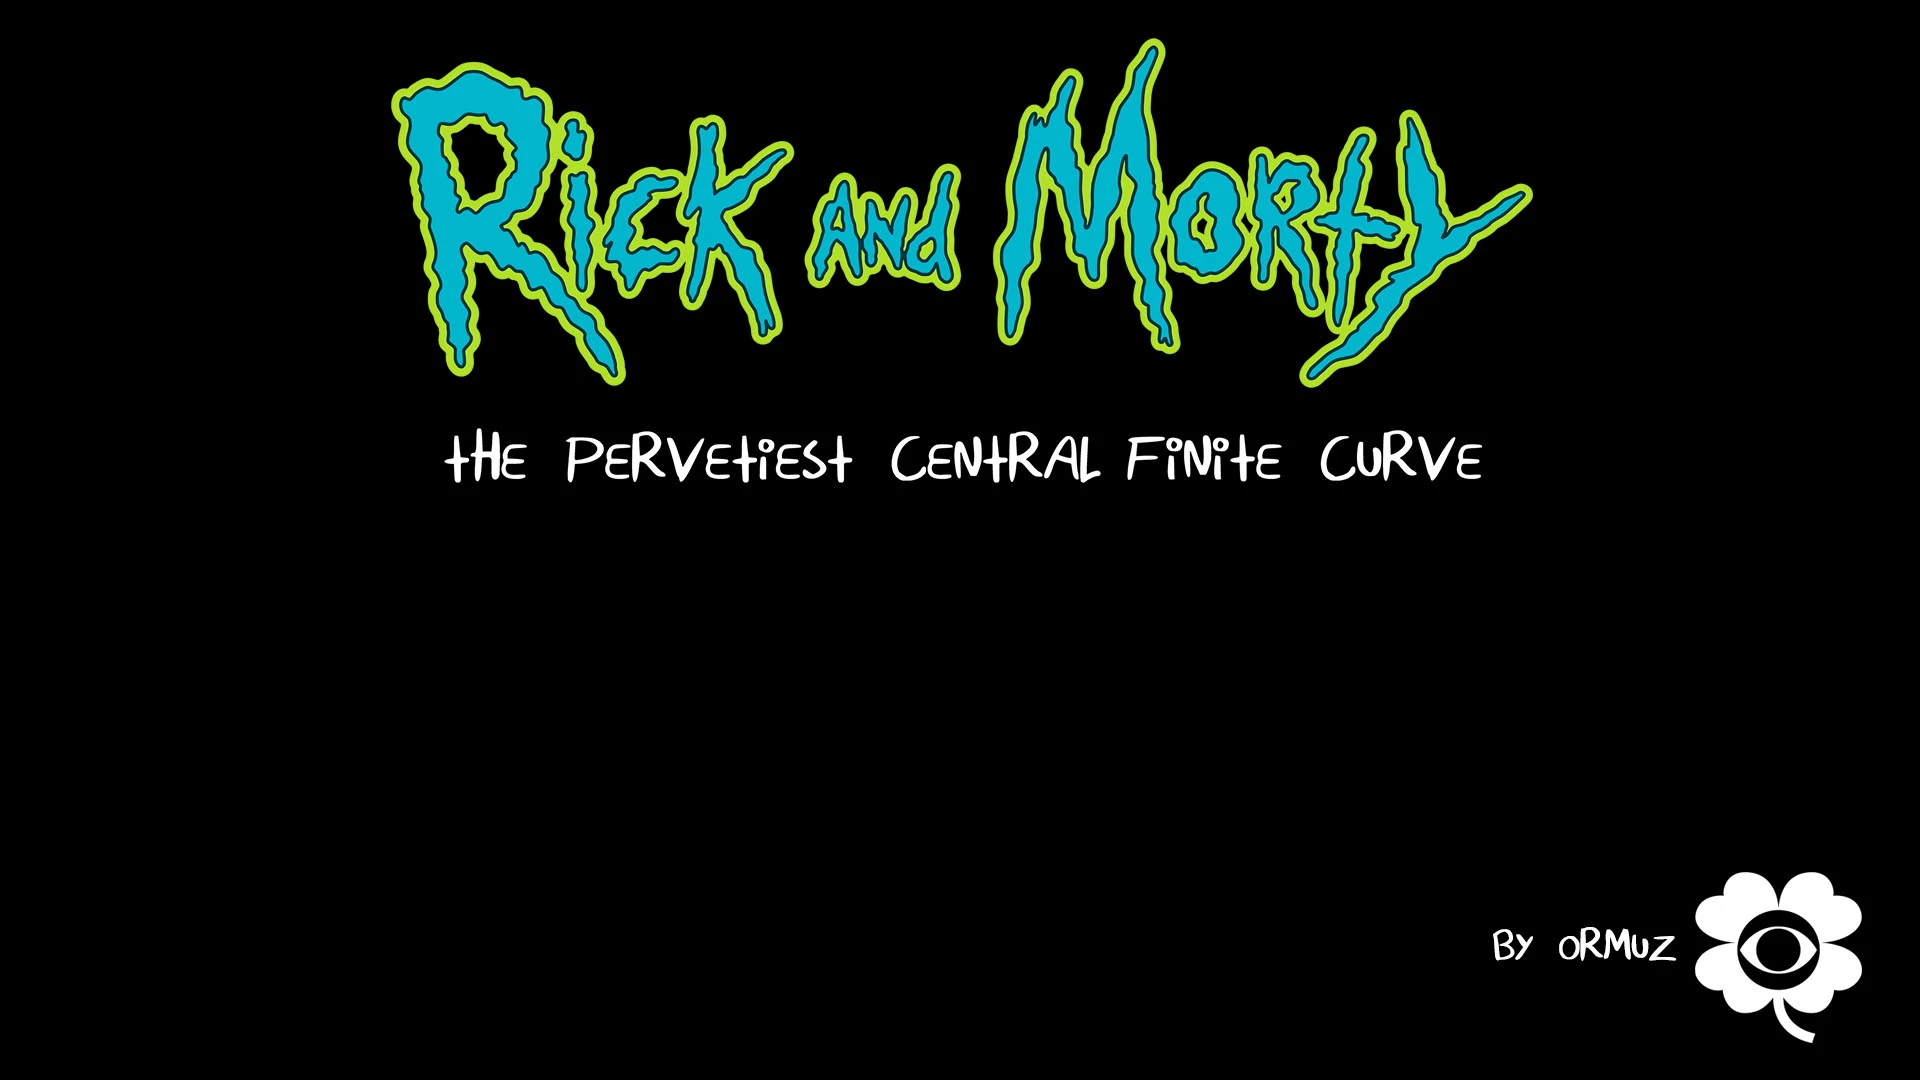 Rick And Morty - The Pervetiest Central Finite Curve [v1.0] main image